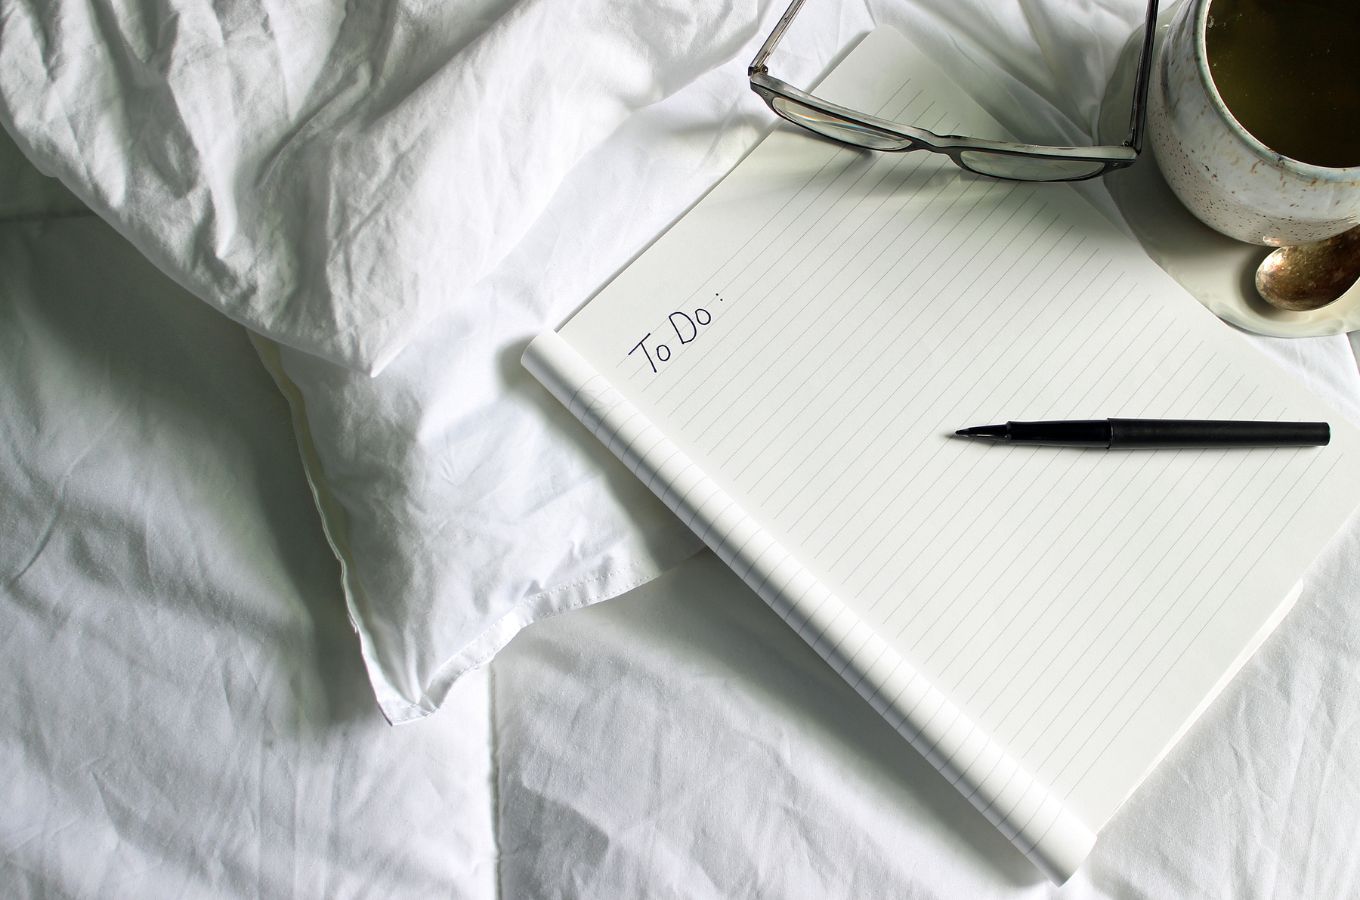 A notebook with "to-do" written on the top page on a white duvet cover